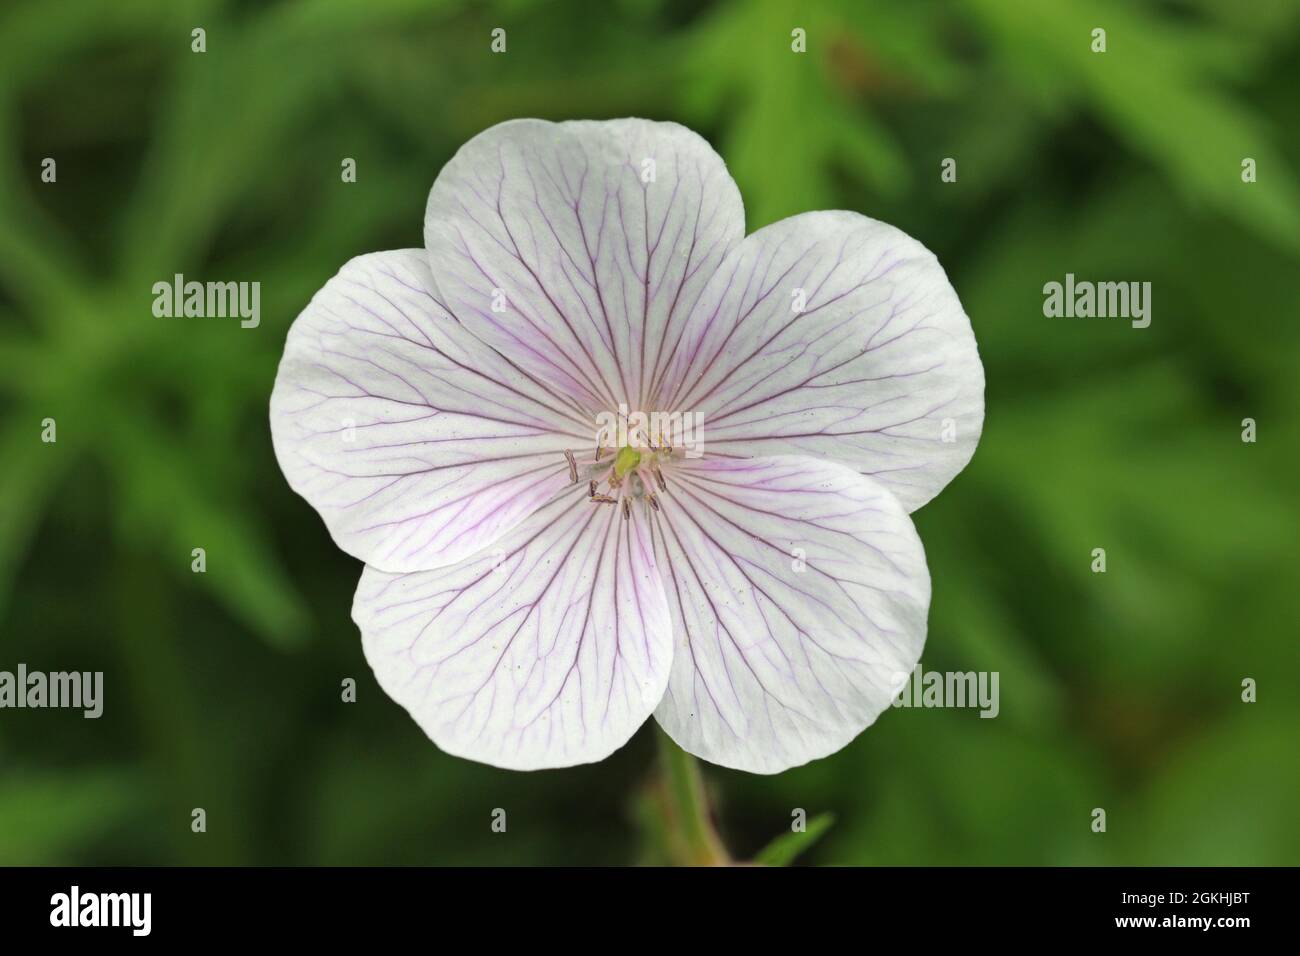 White cranesbill flower with violet and purple veined petals, of unknown Geranium species, in close up with a background of blurred leaves. Stock Photo